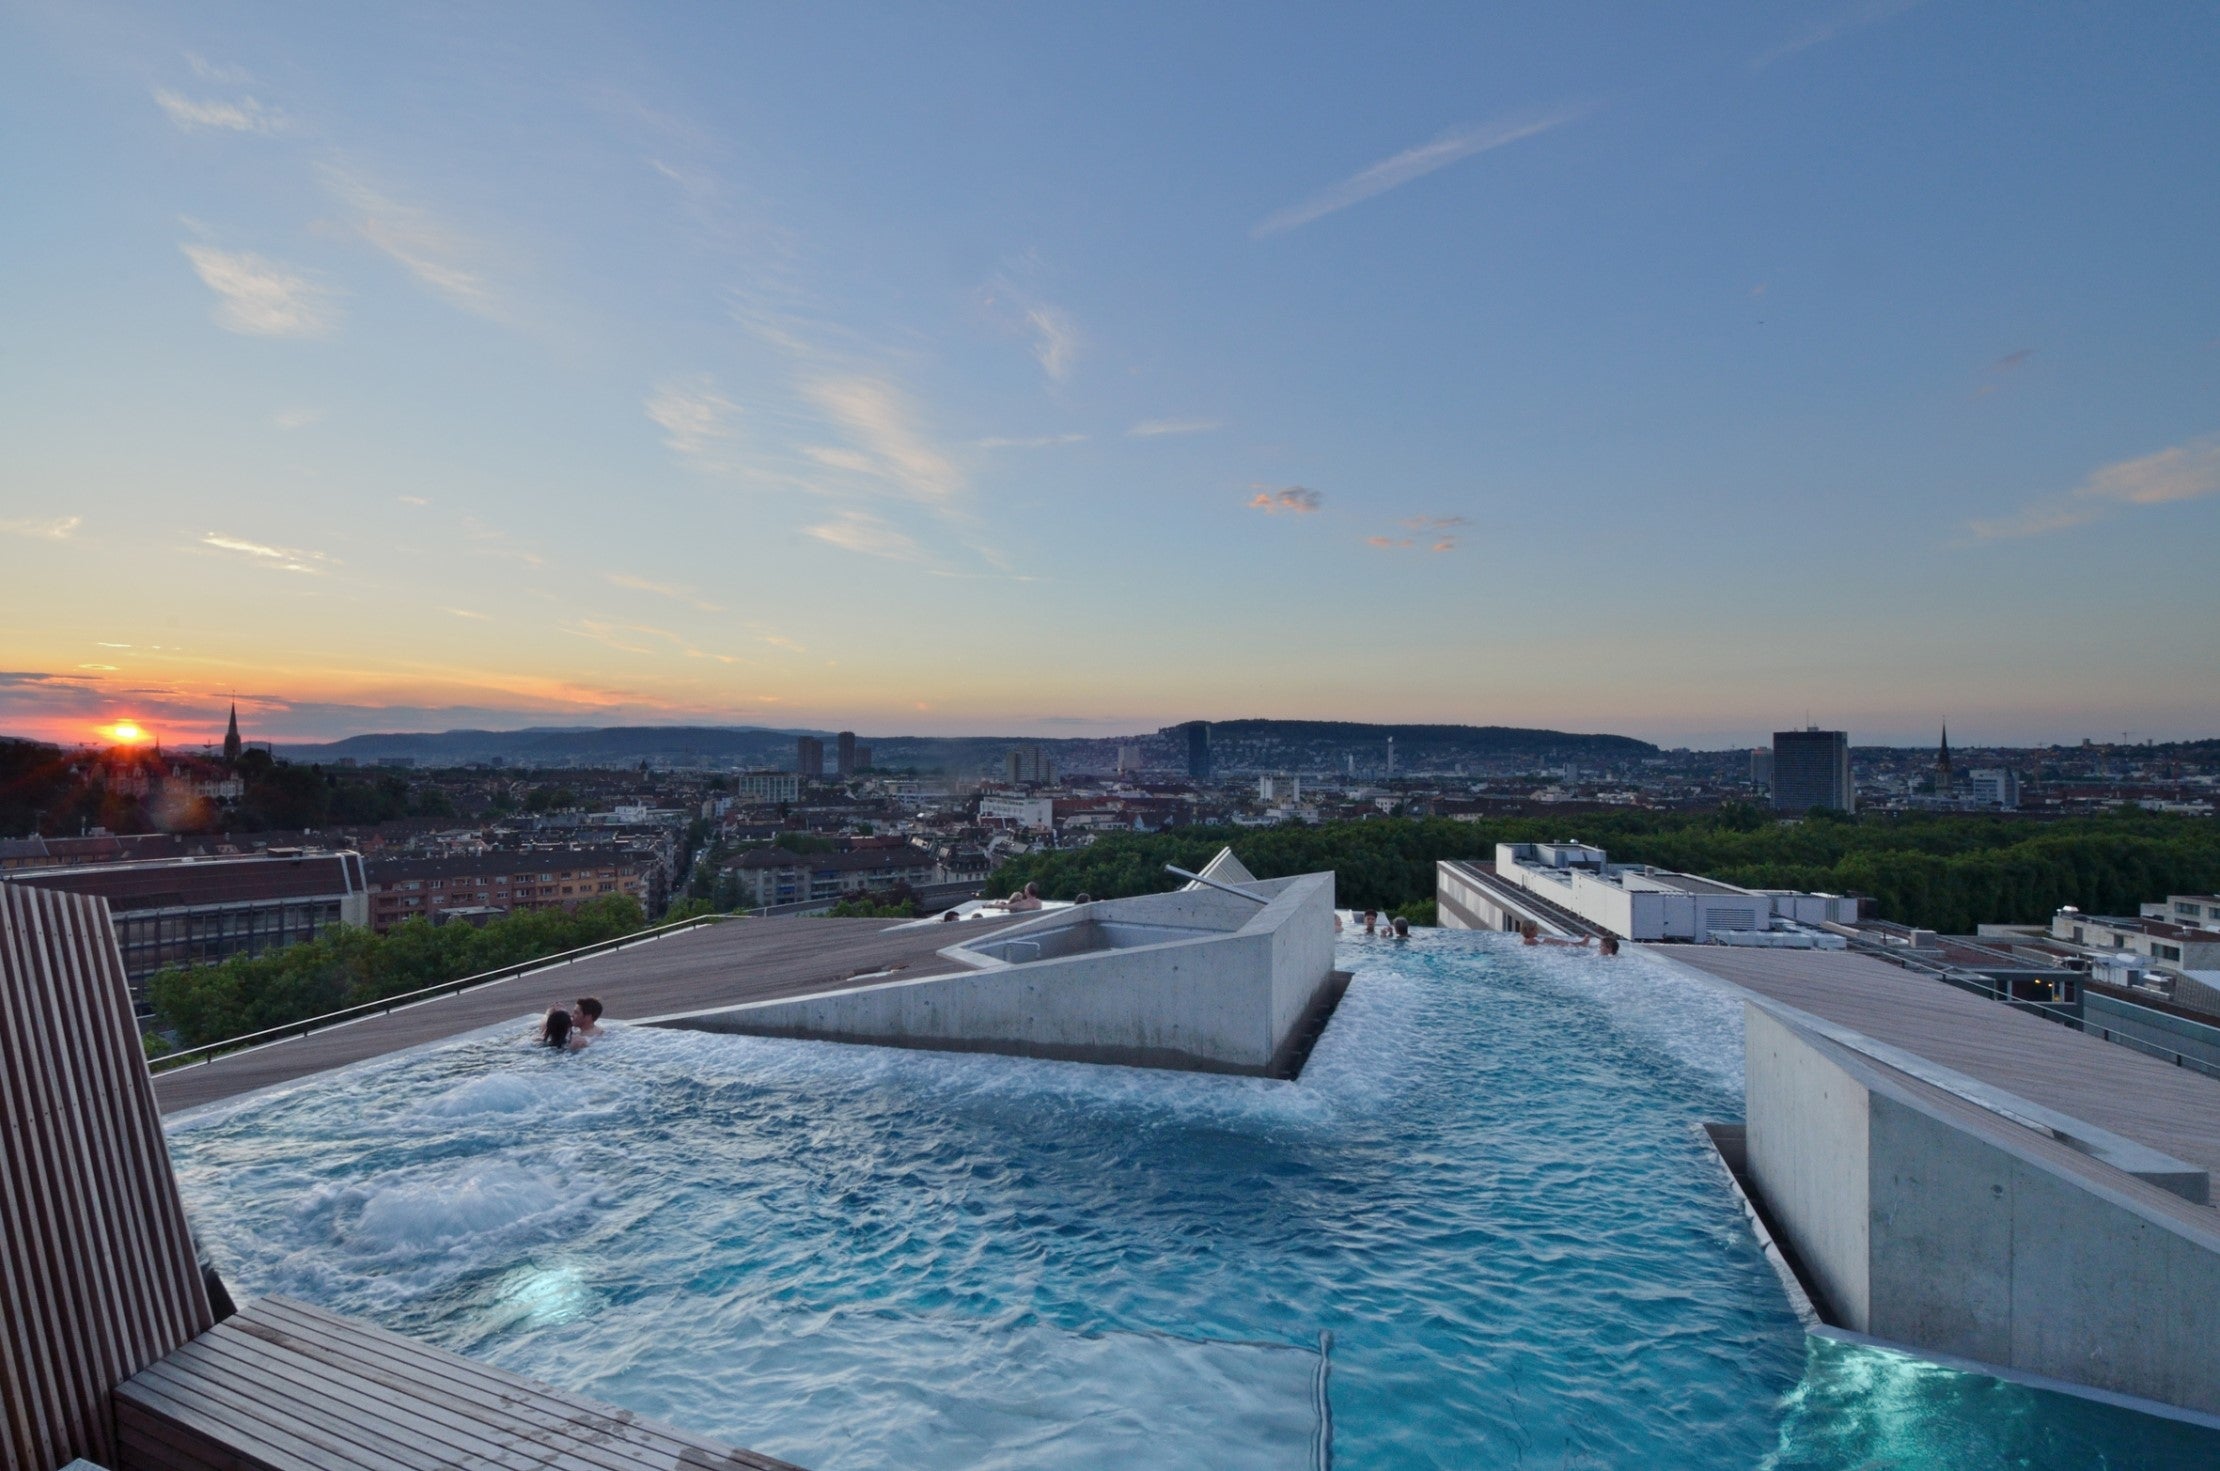 B2 Hotel and Spa’s infinity pool offers a fantastic views of the city – not to mention free chocolate